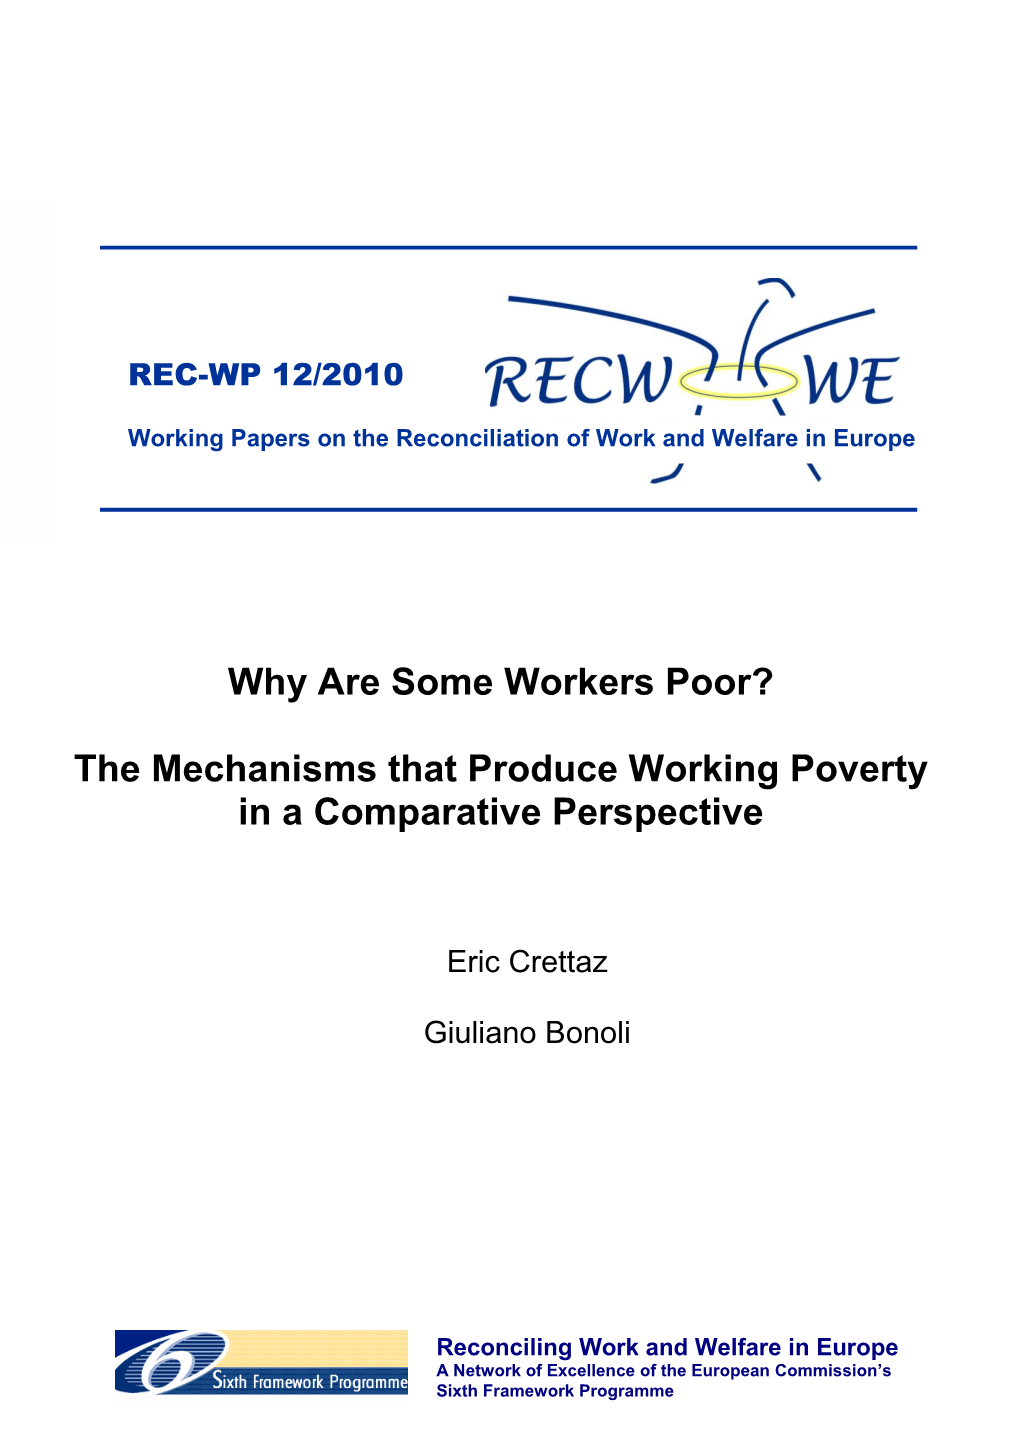 Why Are Some Workers Poor? the Mechanisms That Produce Working Poverty in a Comparative Perspective